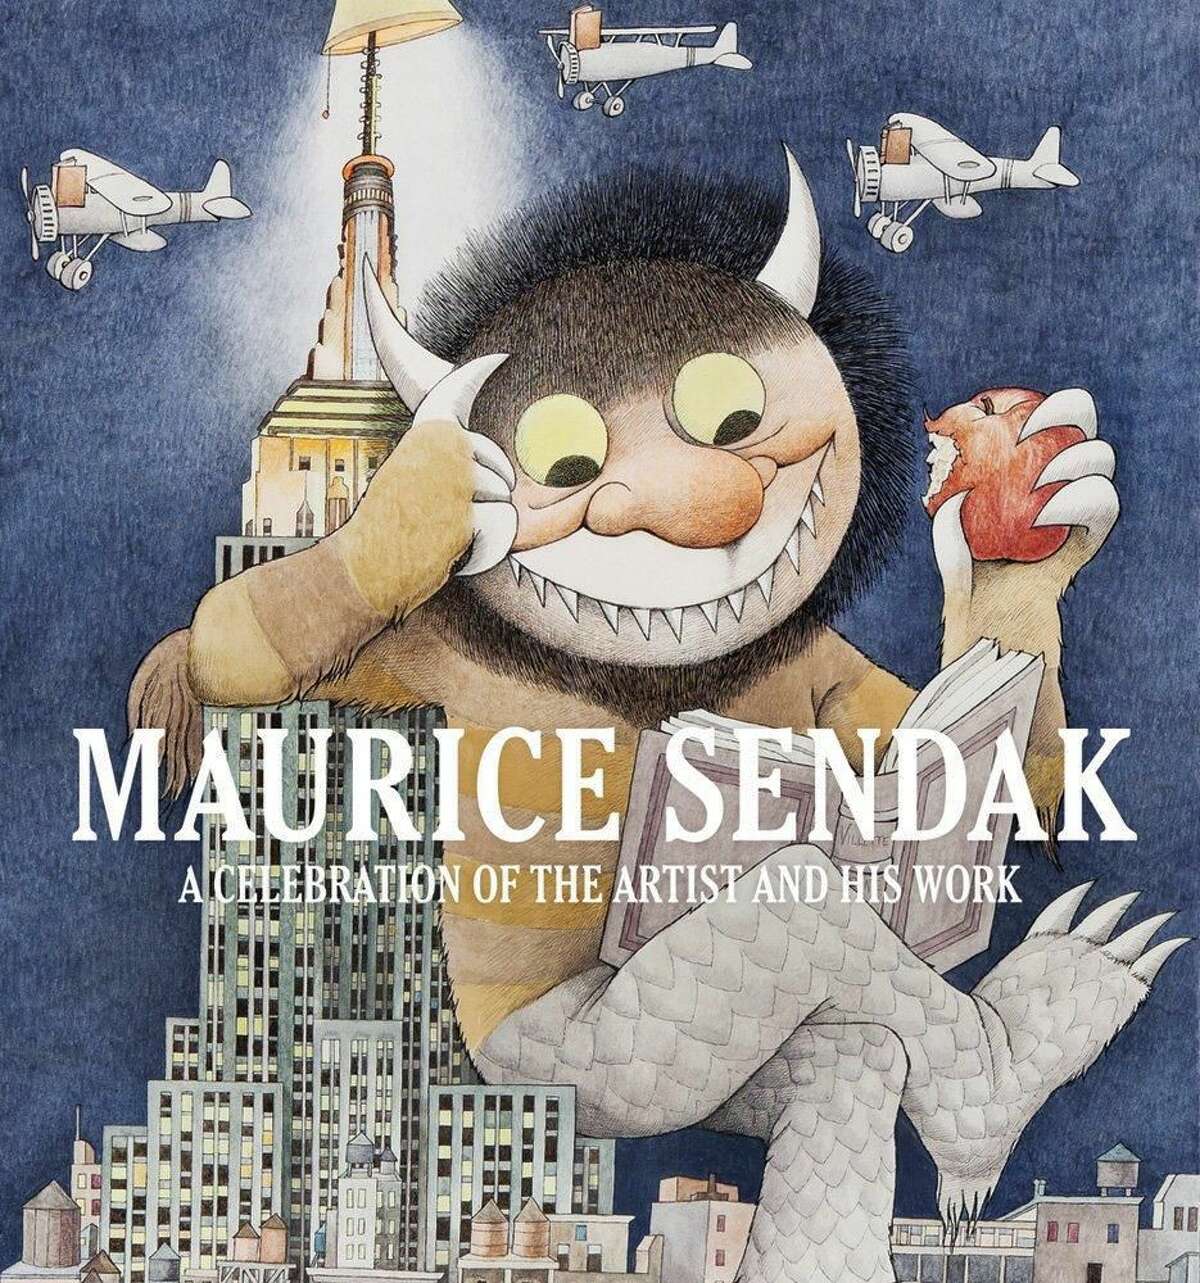 The cover of the book celebrating Maurice Sendak that contains an essay by Leonard Marcus, one of the more than 30 authors attending an event Friday at the library in Sharon.